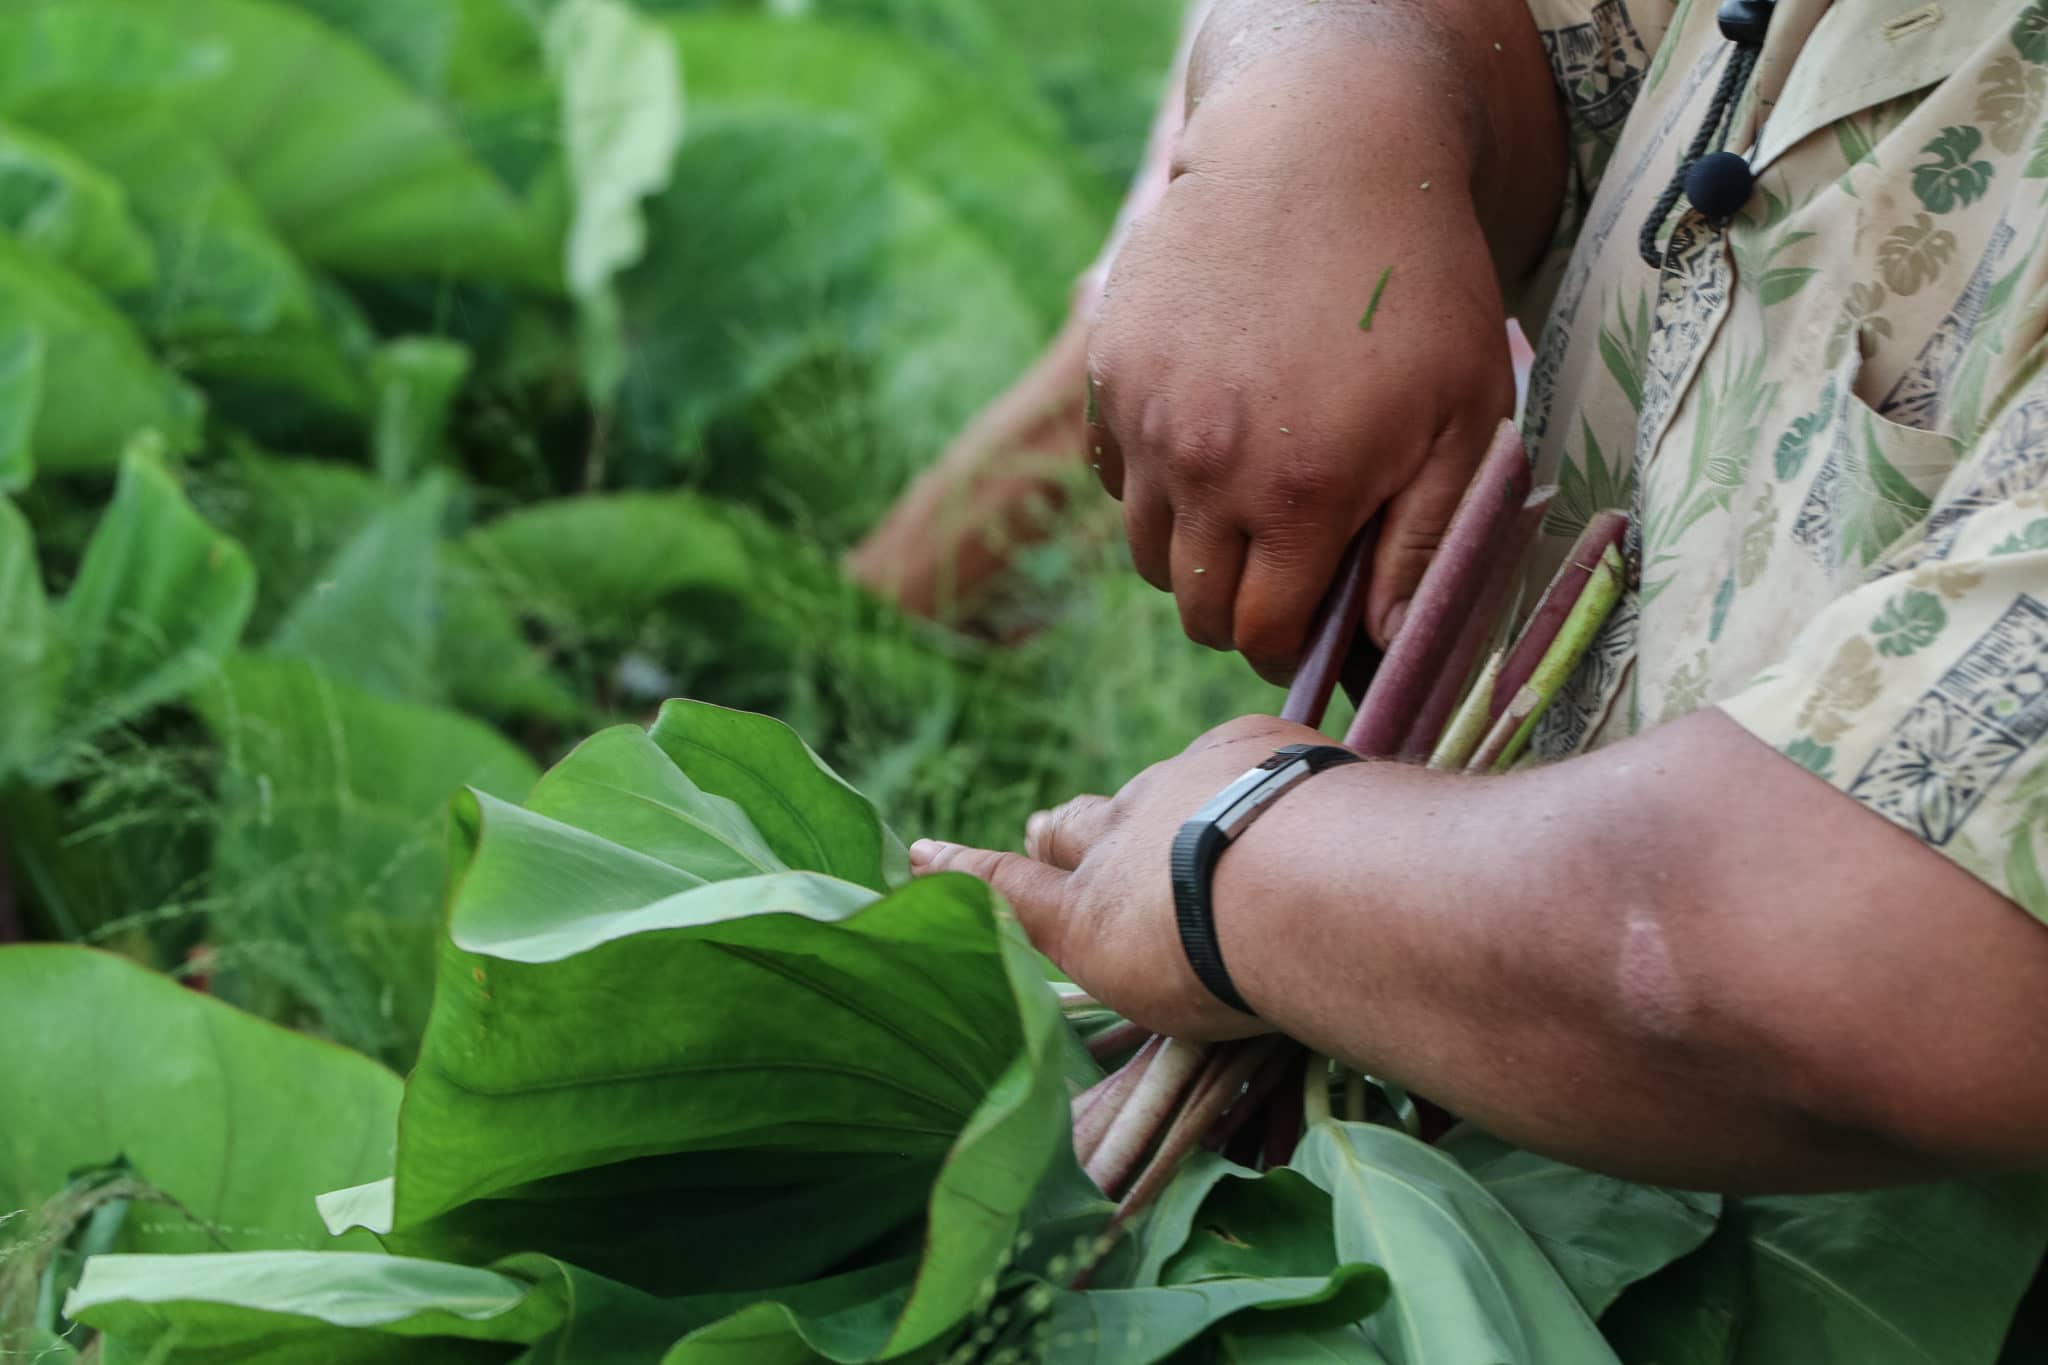 Project Director Kūʻike cuts the first kalo crop at Kupa ʻAina